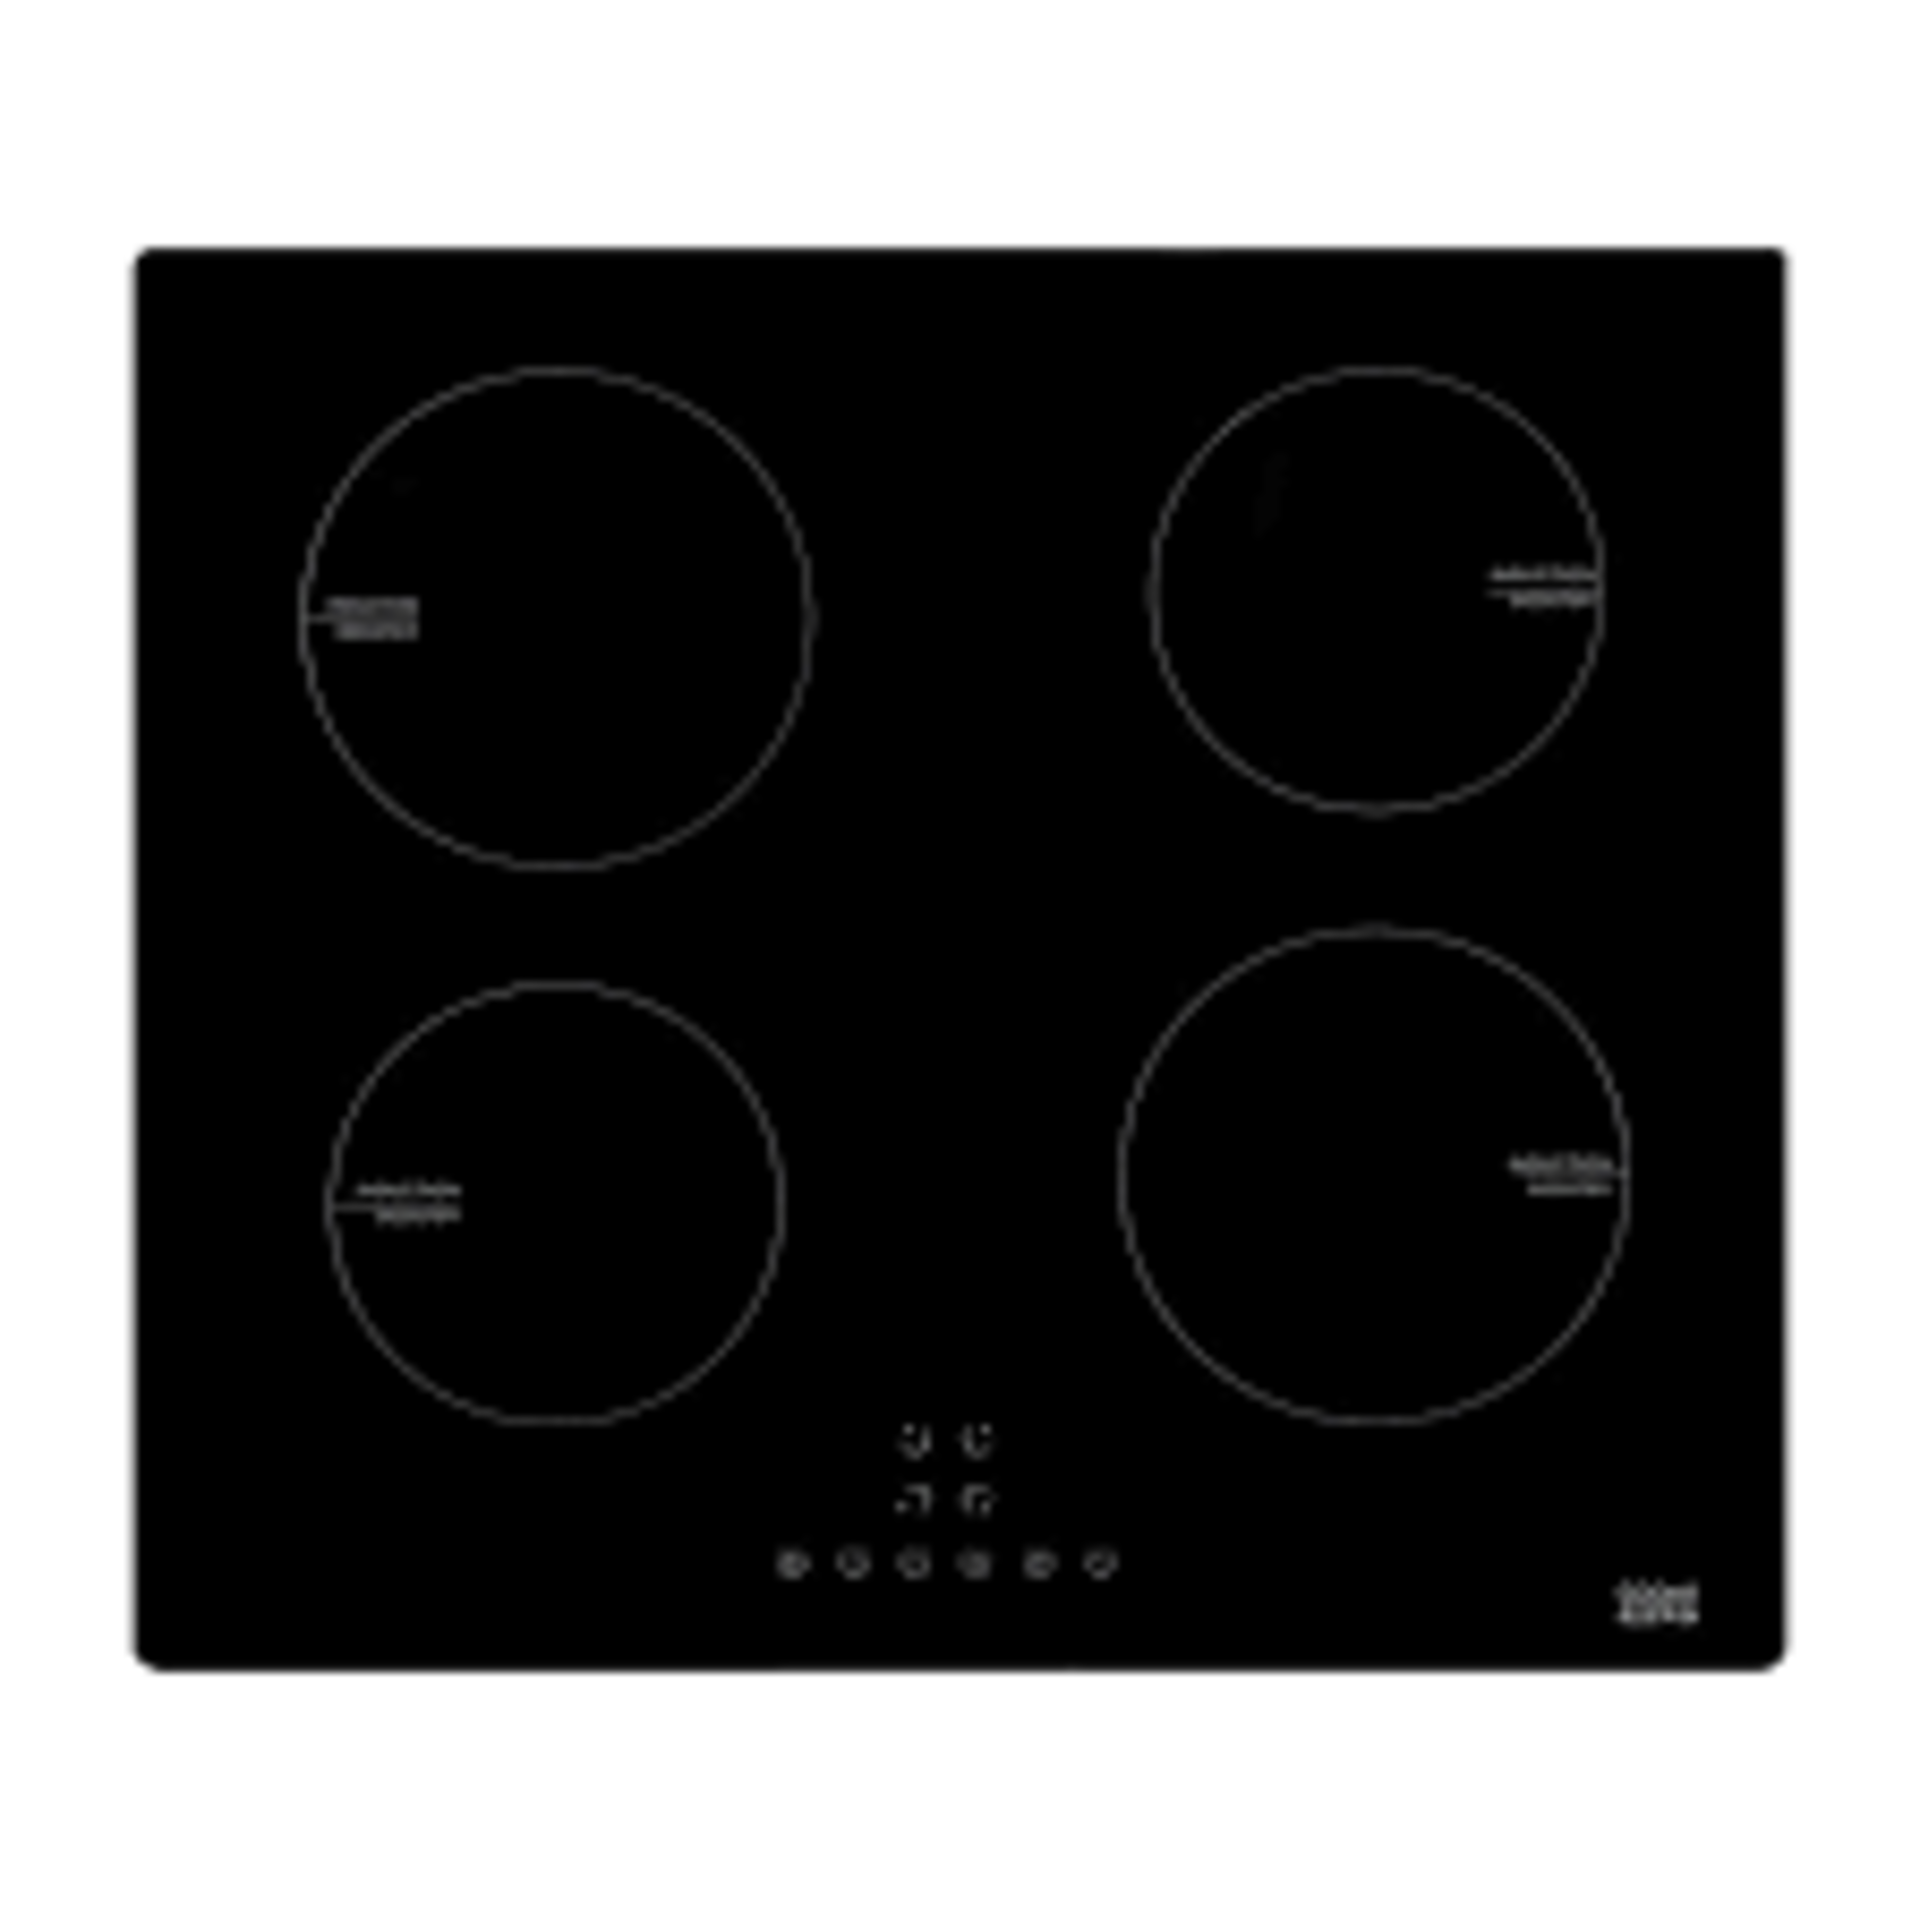 Cooke & Lewis CLIND60 59cm Induction Hob - Black. - ER48. This Glass induction hob is stylish and